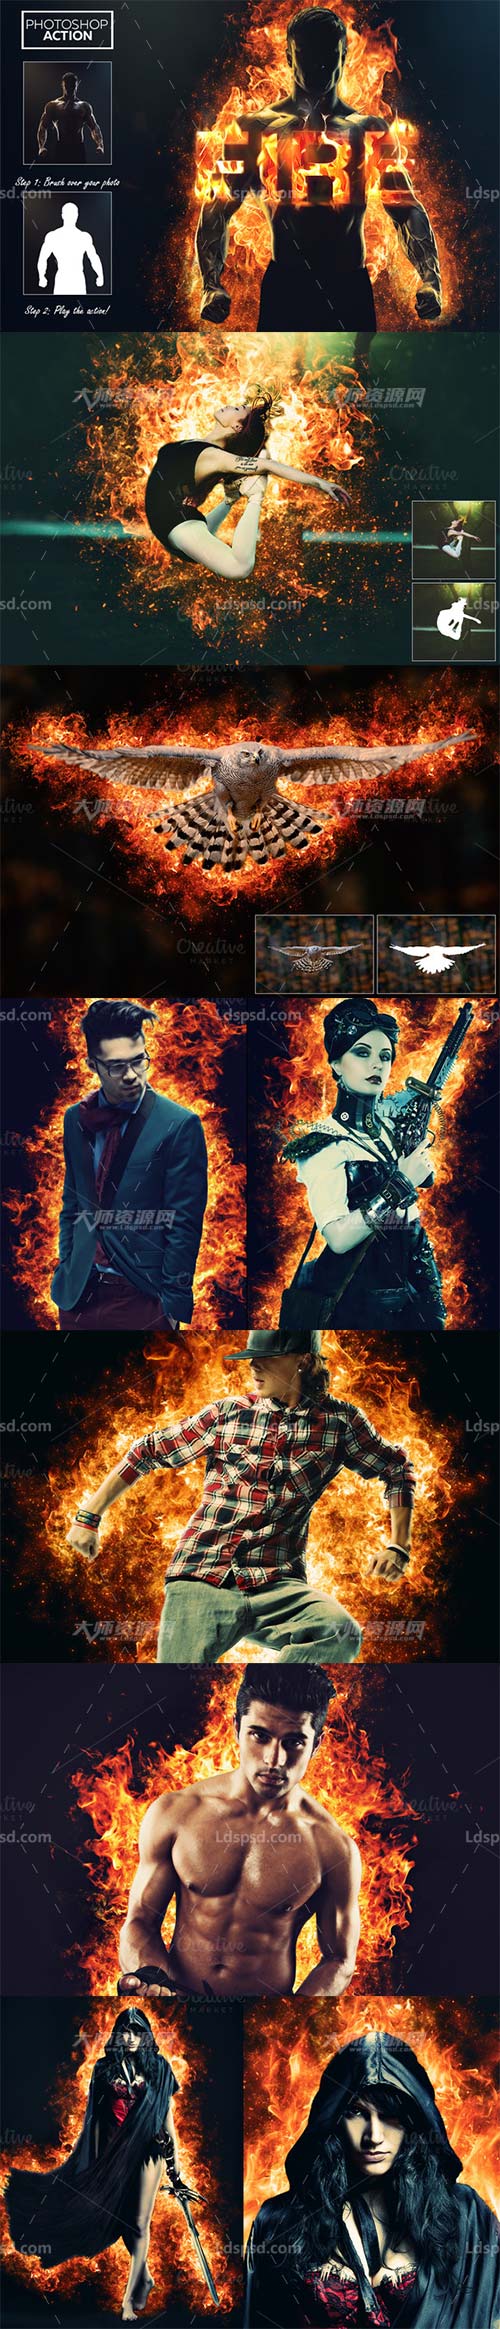 Fire Effect - Photoshop Action,极品PS动作－烈火焚身(2016新版)